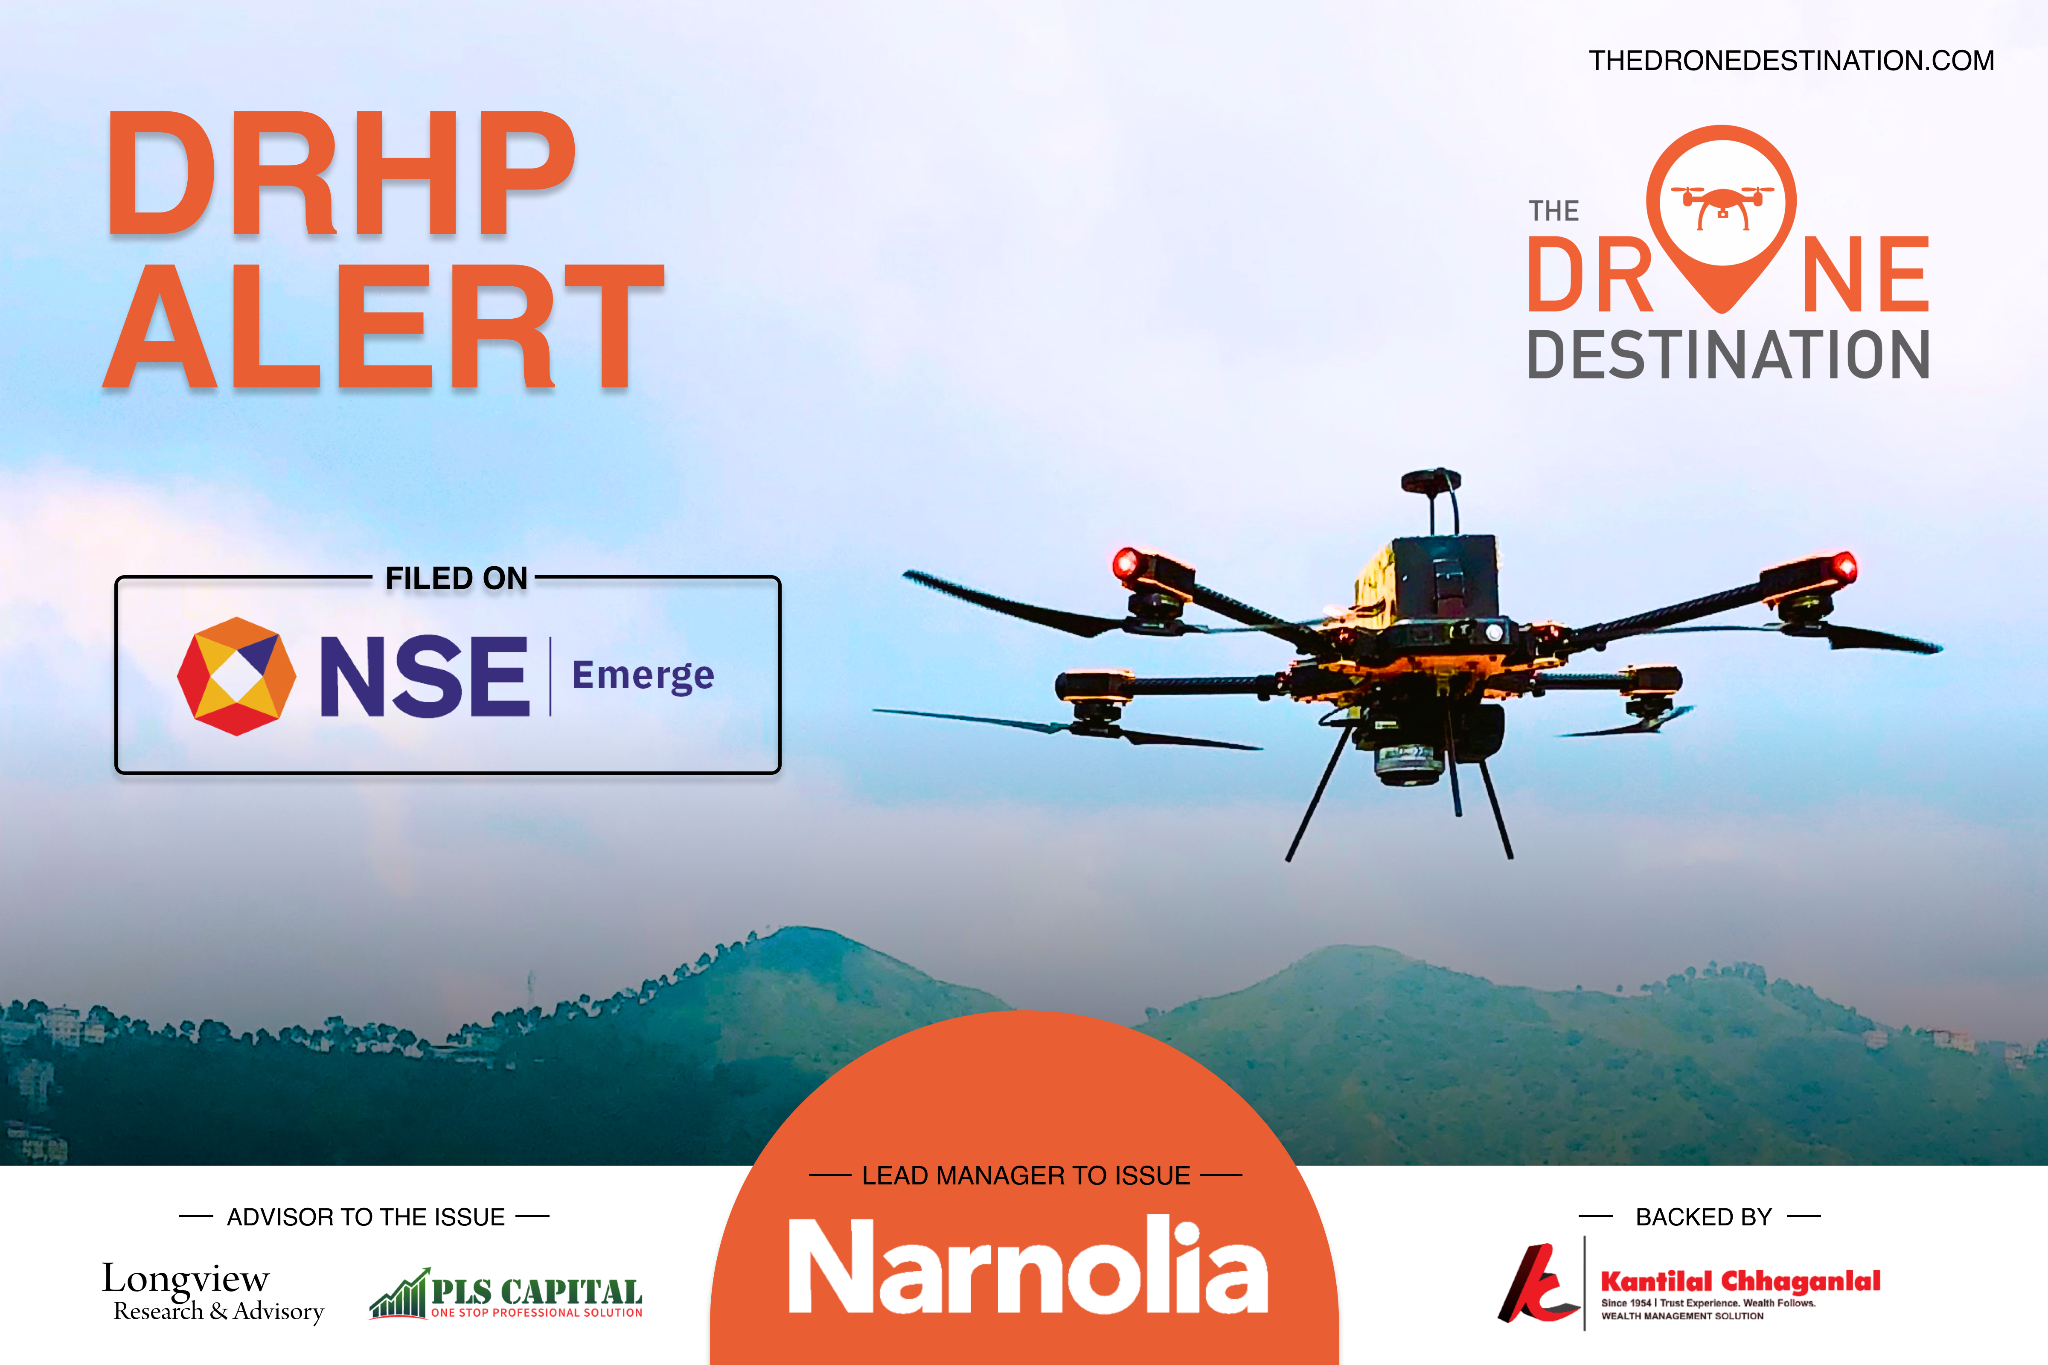 Drone Destination - India's largest Drone Training Organization and a leading Drone-as-a-Service company sets course for Growth, Files DRHP with NSE Emerge